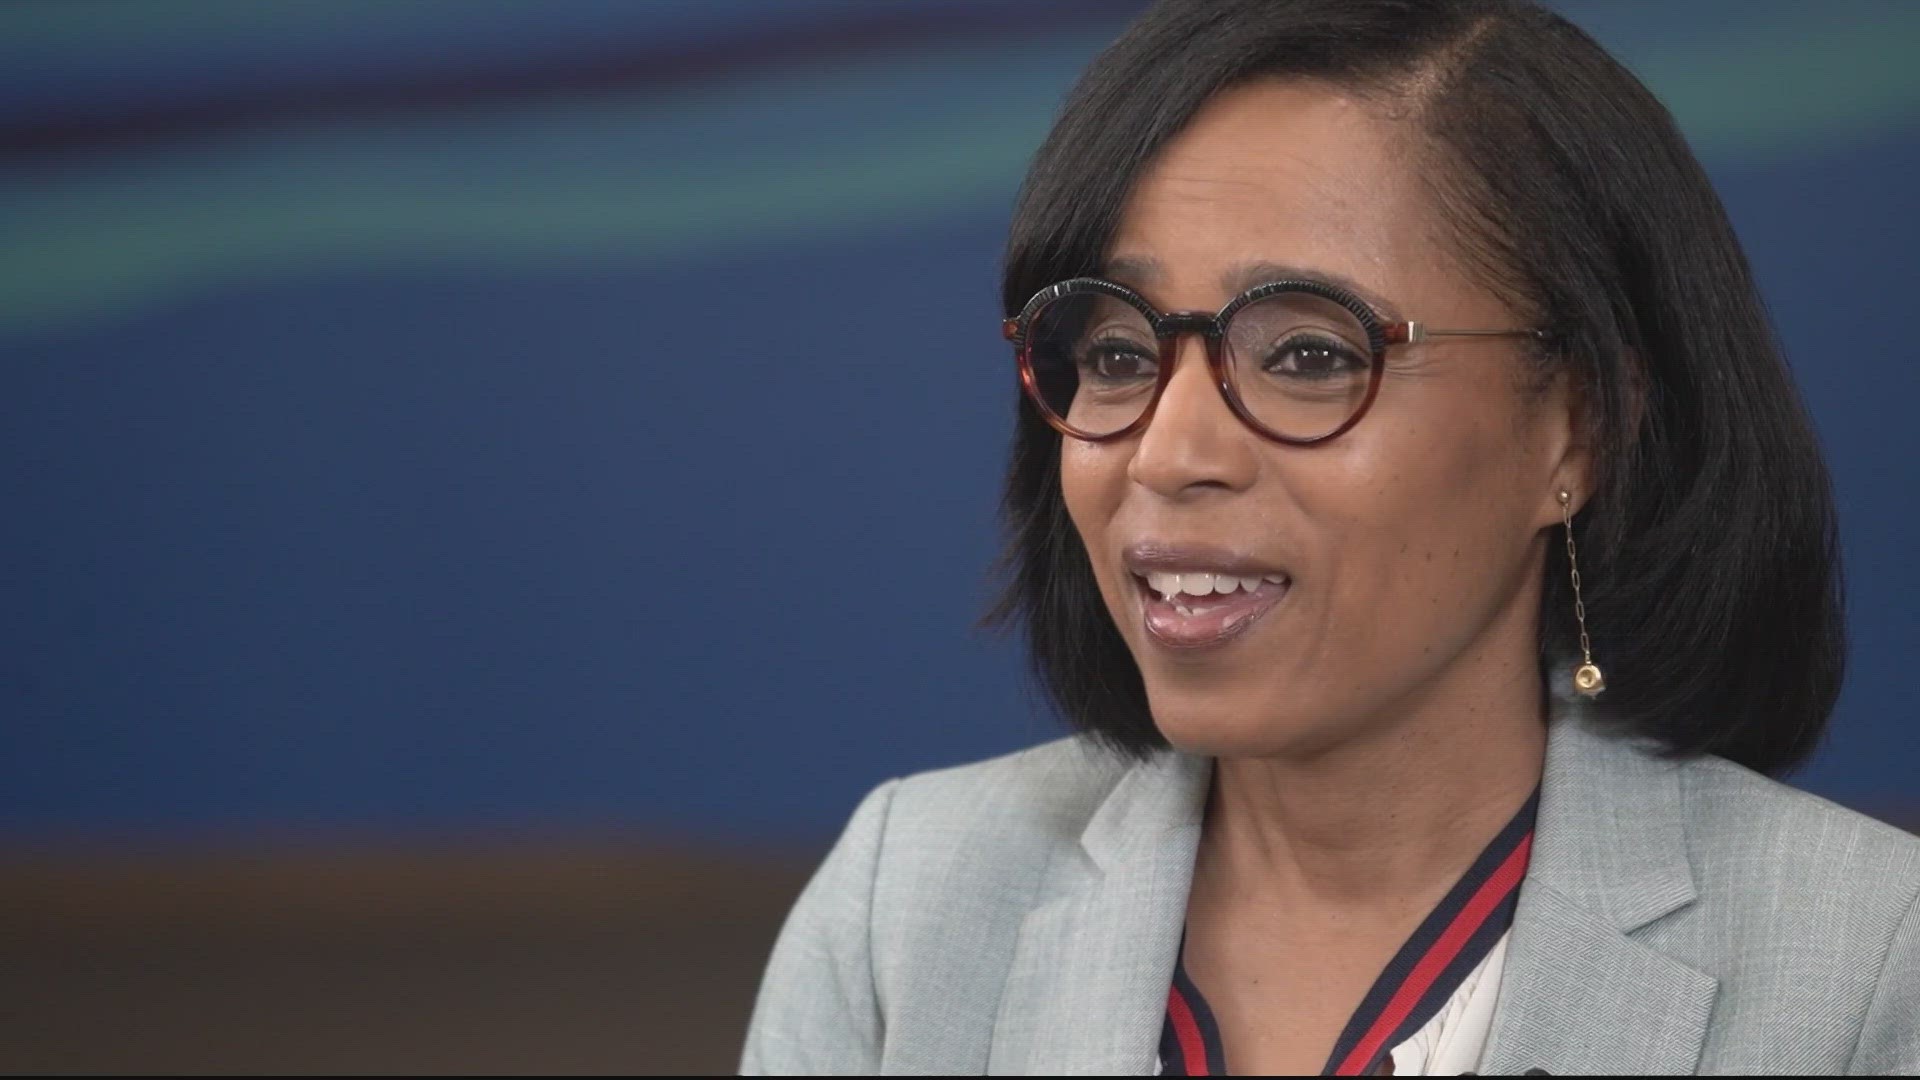 Angela Alsobrooks could make history if she wins Maryland's US Senate primary and general election. She acknowledges the opportunity but is focused on the issues.